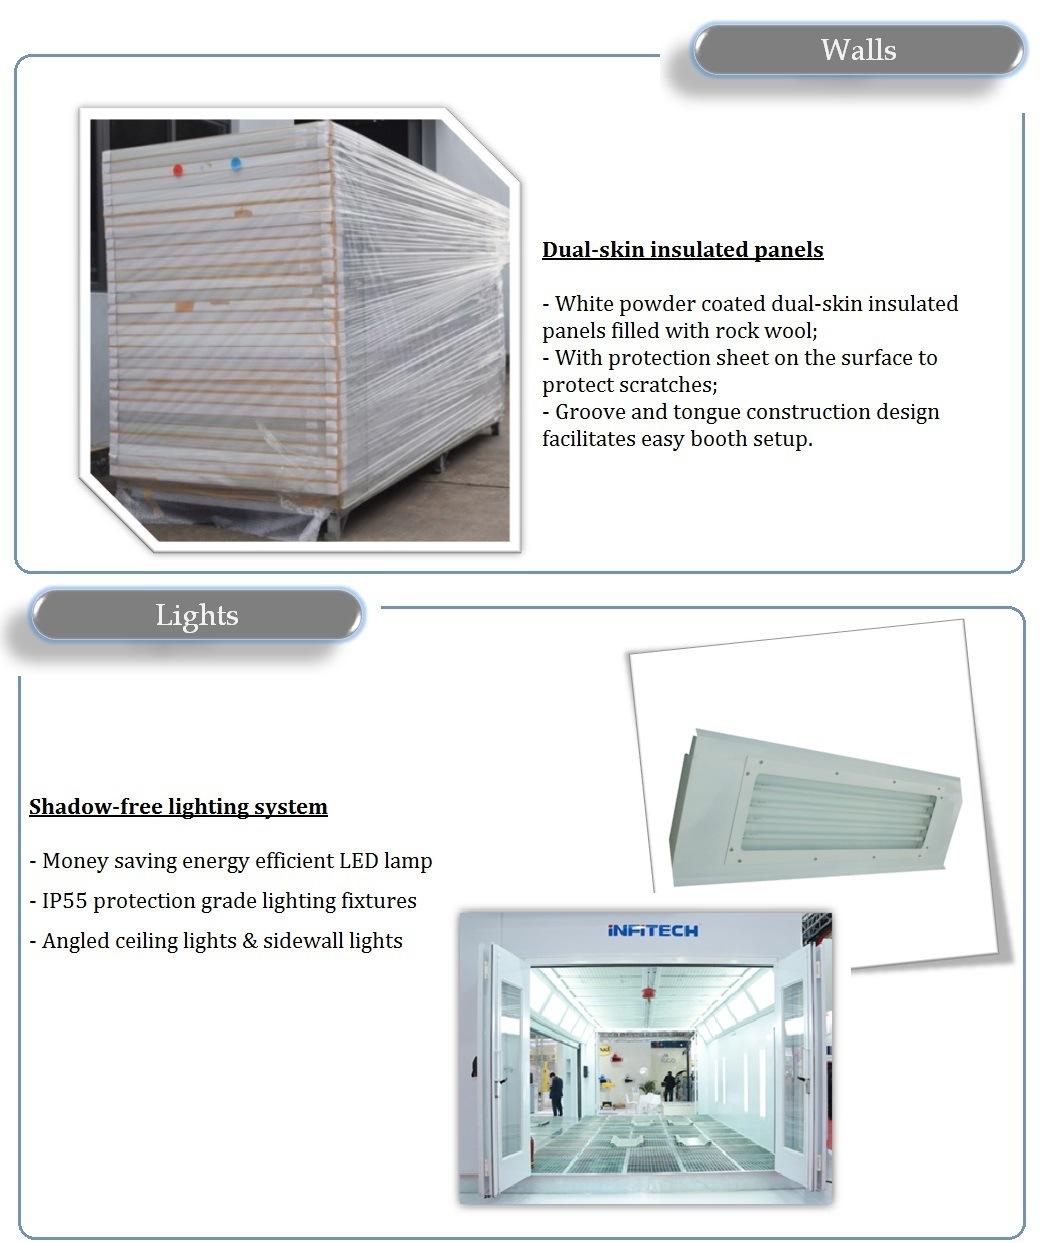 Ce Compliance Downdraft Spray Booth for Industrial Vans